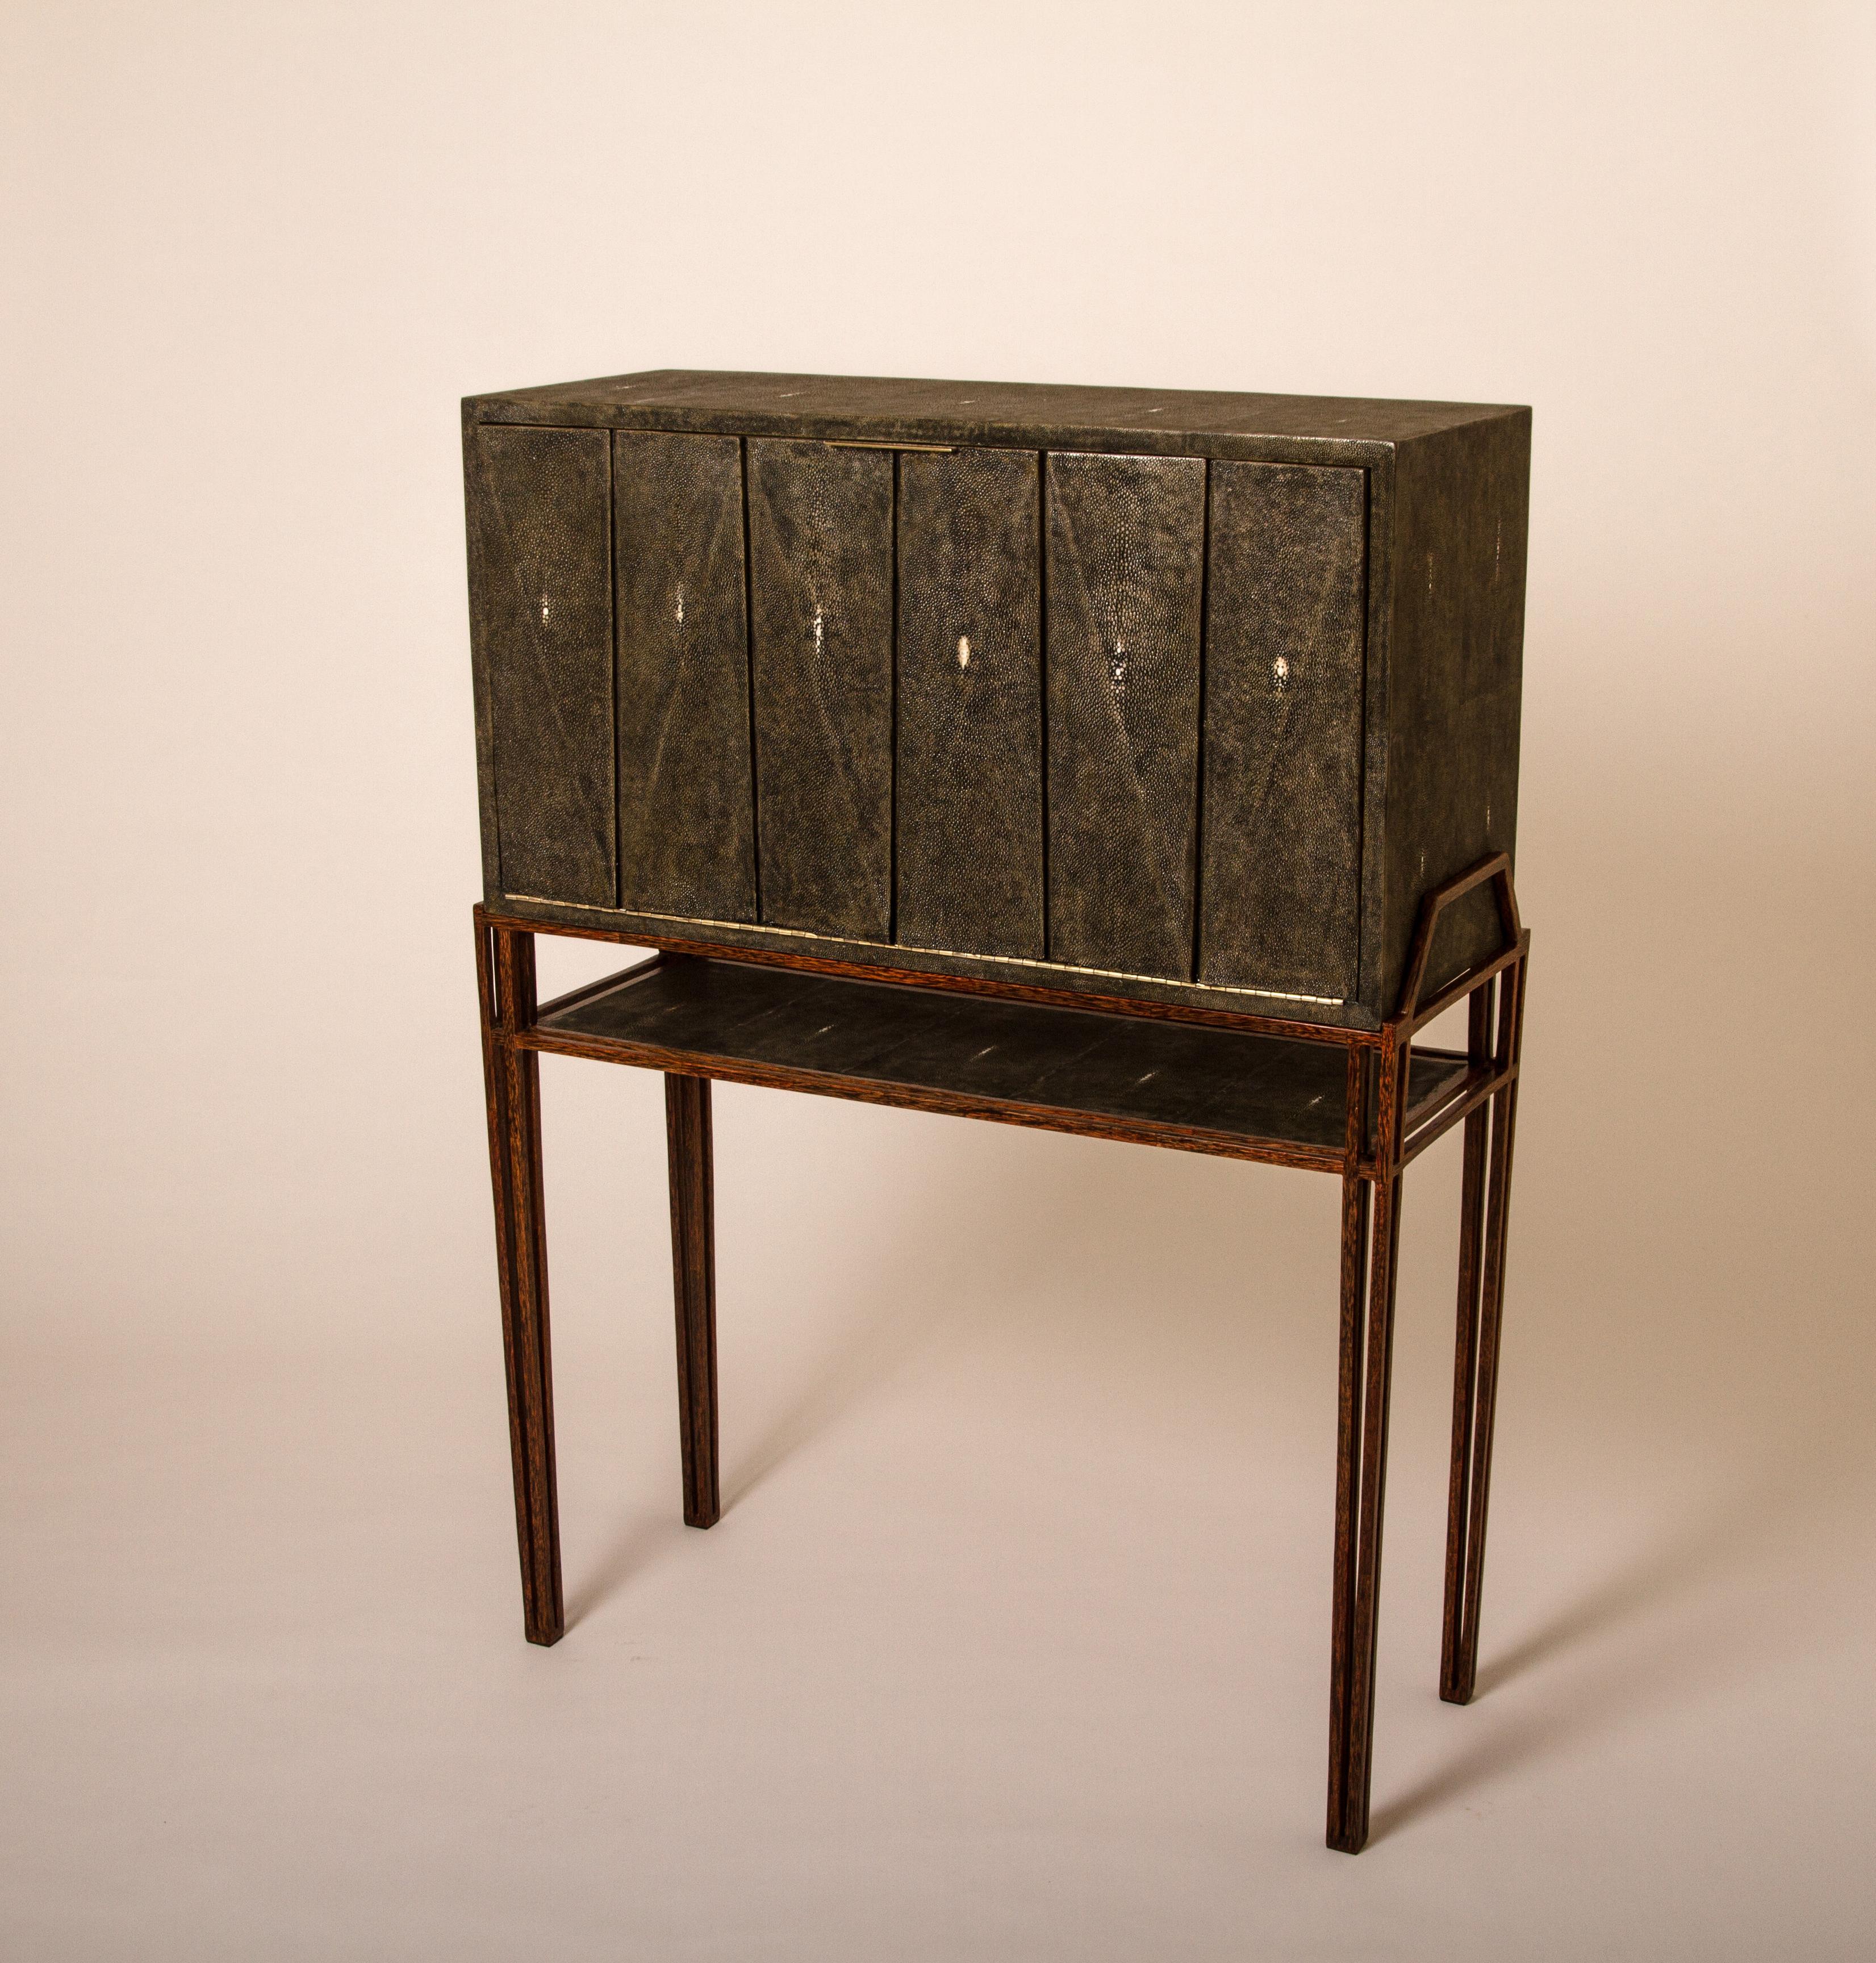 The secrétaire desk is the perfect functional working unit. The flap top opens up into a desk with several compartments, inlaid in antique black shagreen and wood veneer, to store items and once closed offers a beautiful piece to look at. The